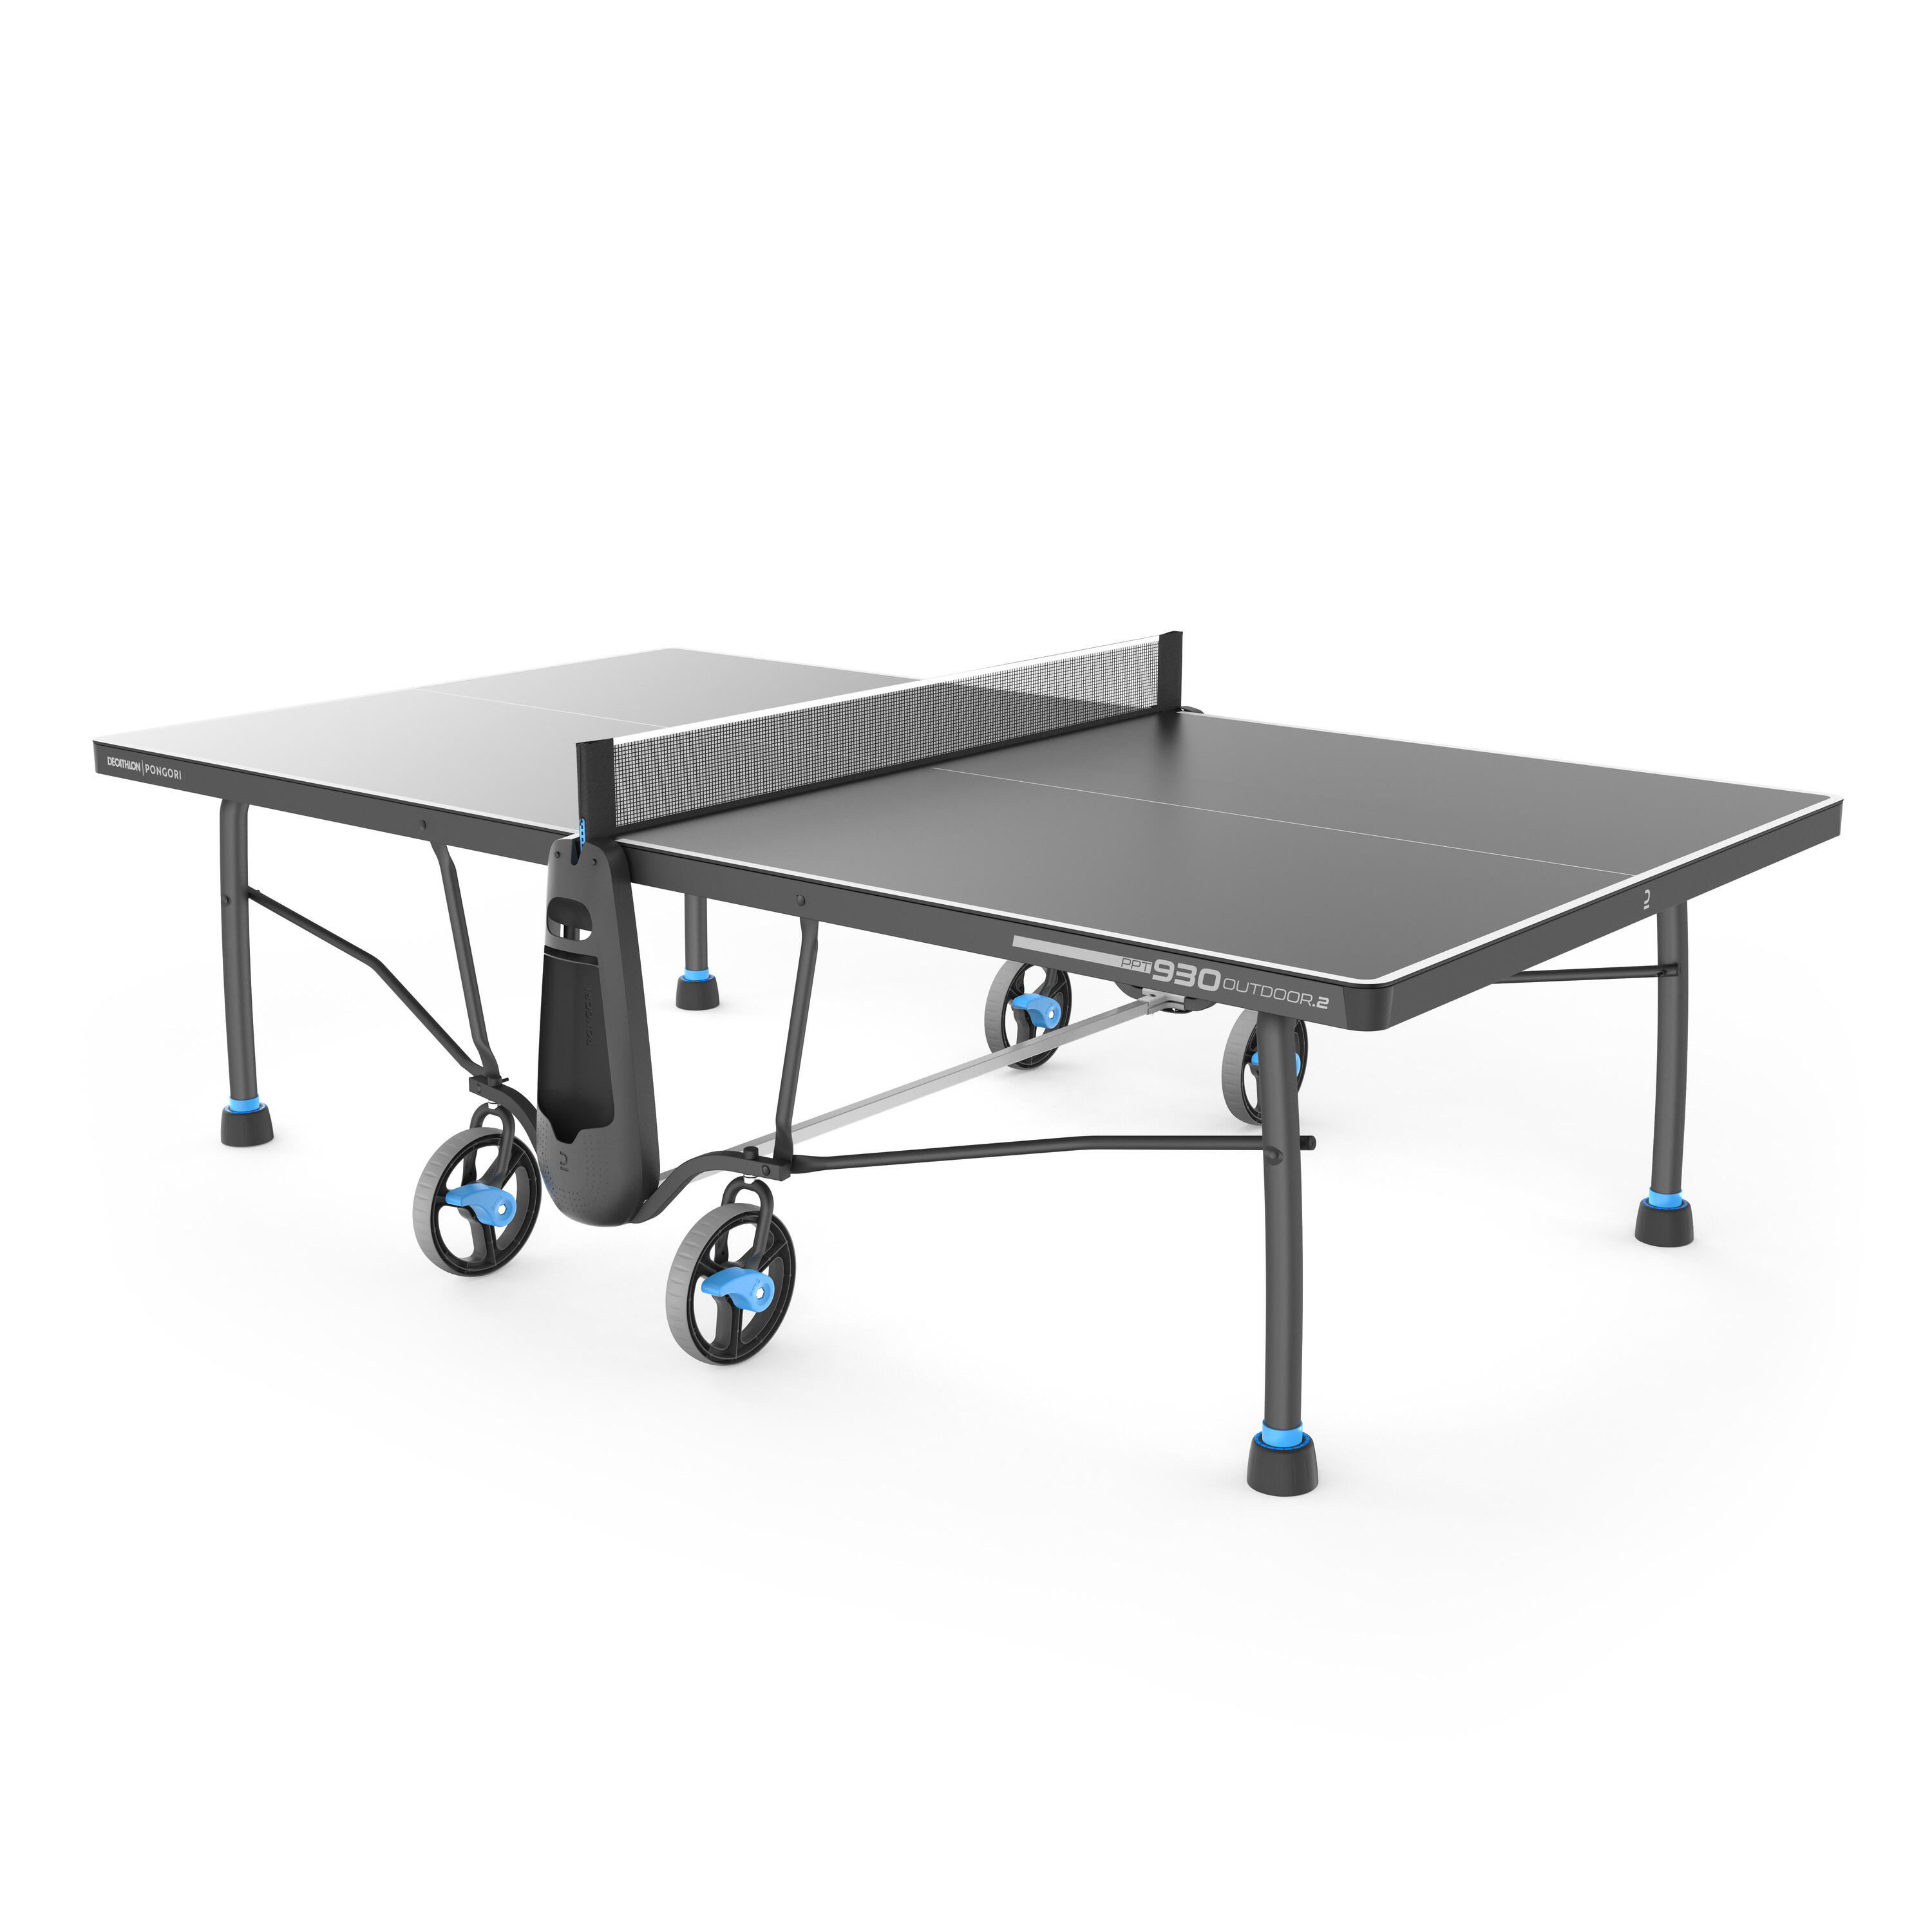 Outdoor Table Tennis Table PPT 930.2 With Cover - Black 16/16